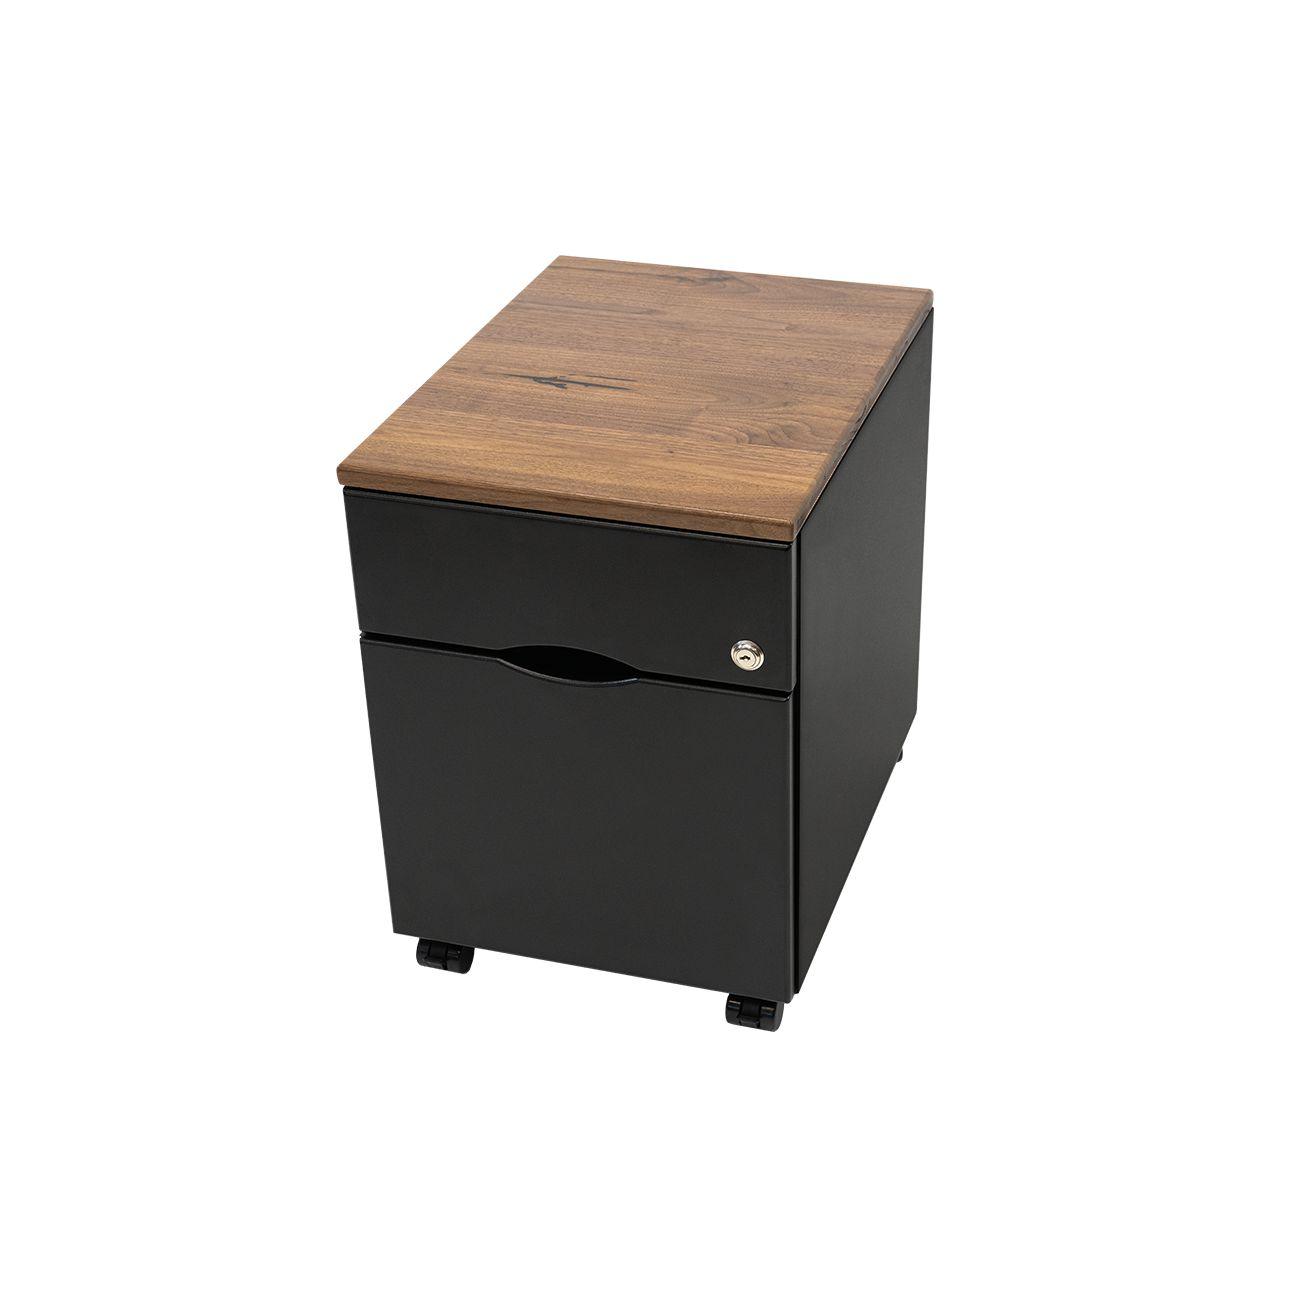 Mobile File Cabinet - Solid Wood Top - iMovR